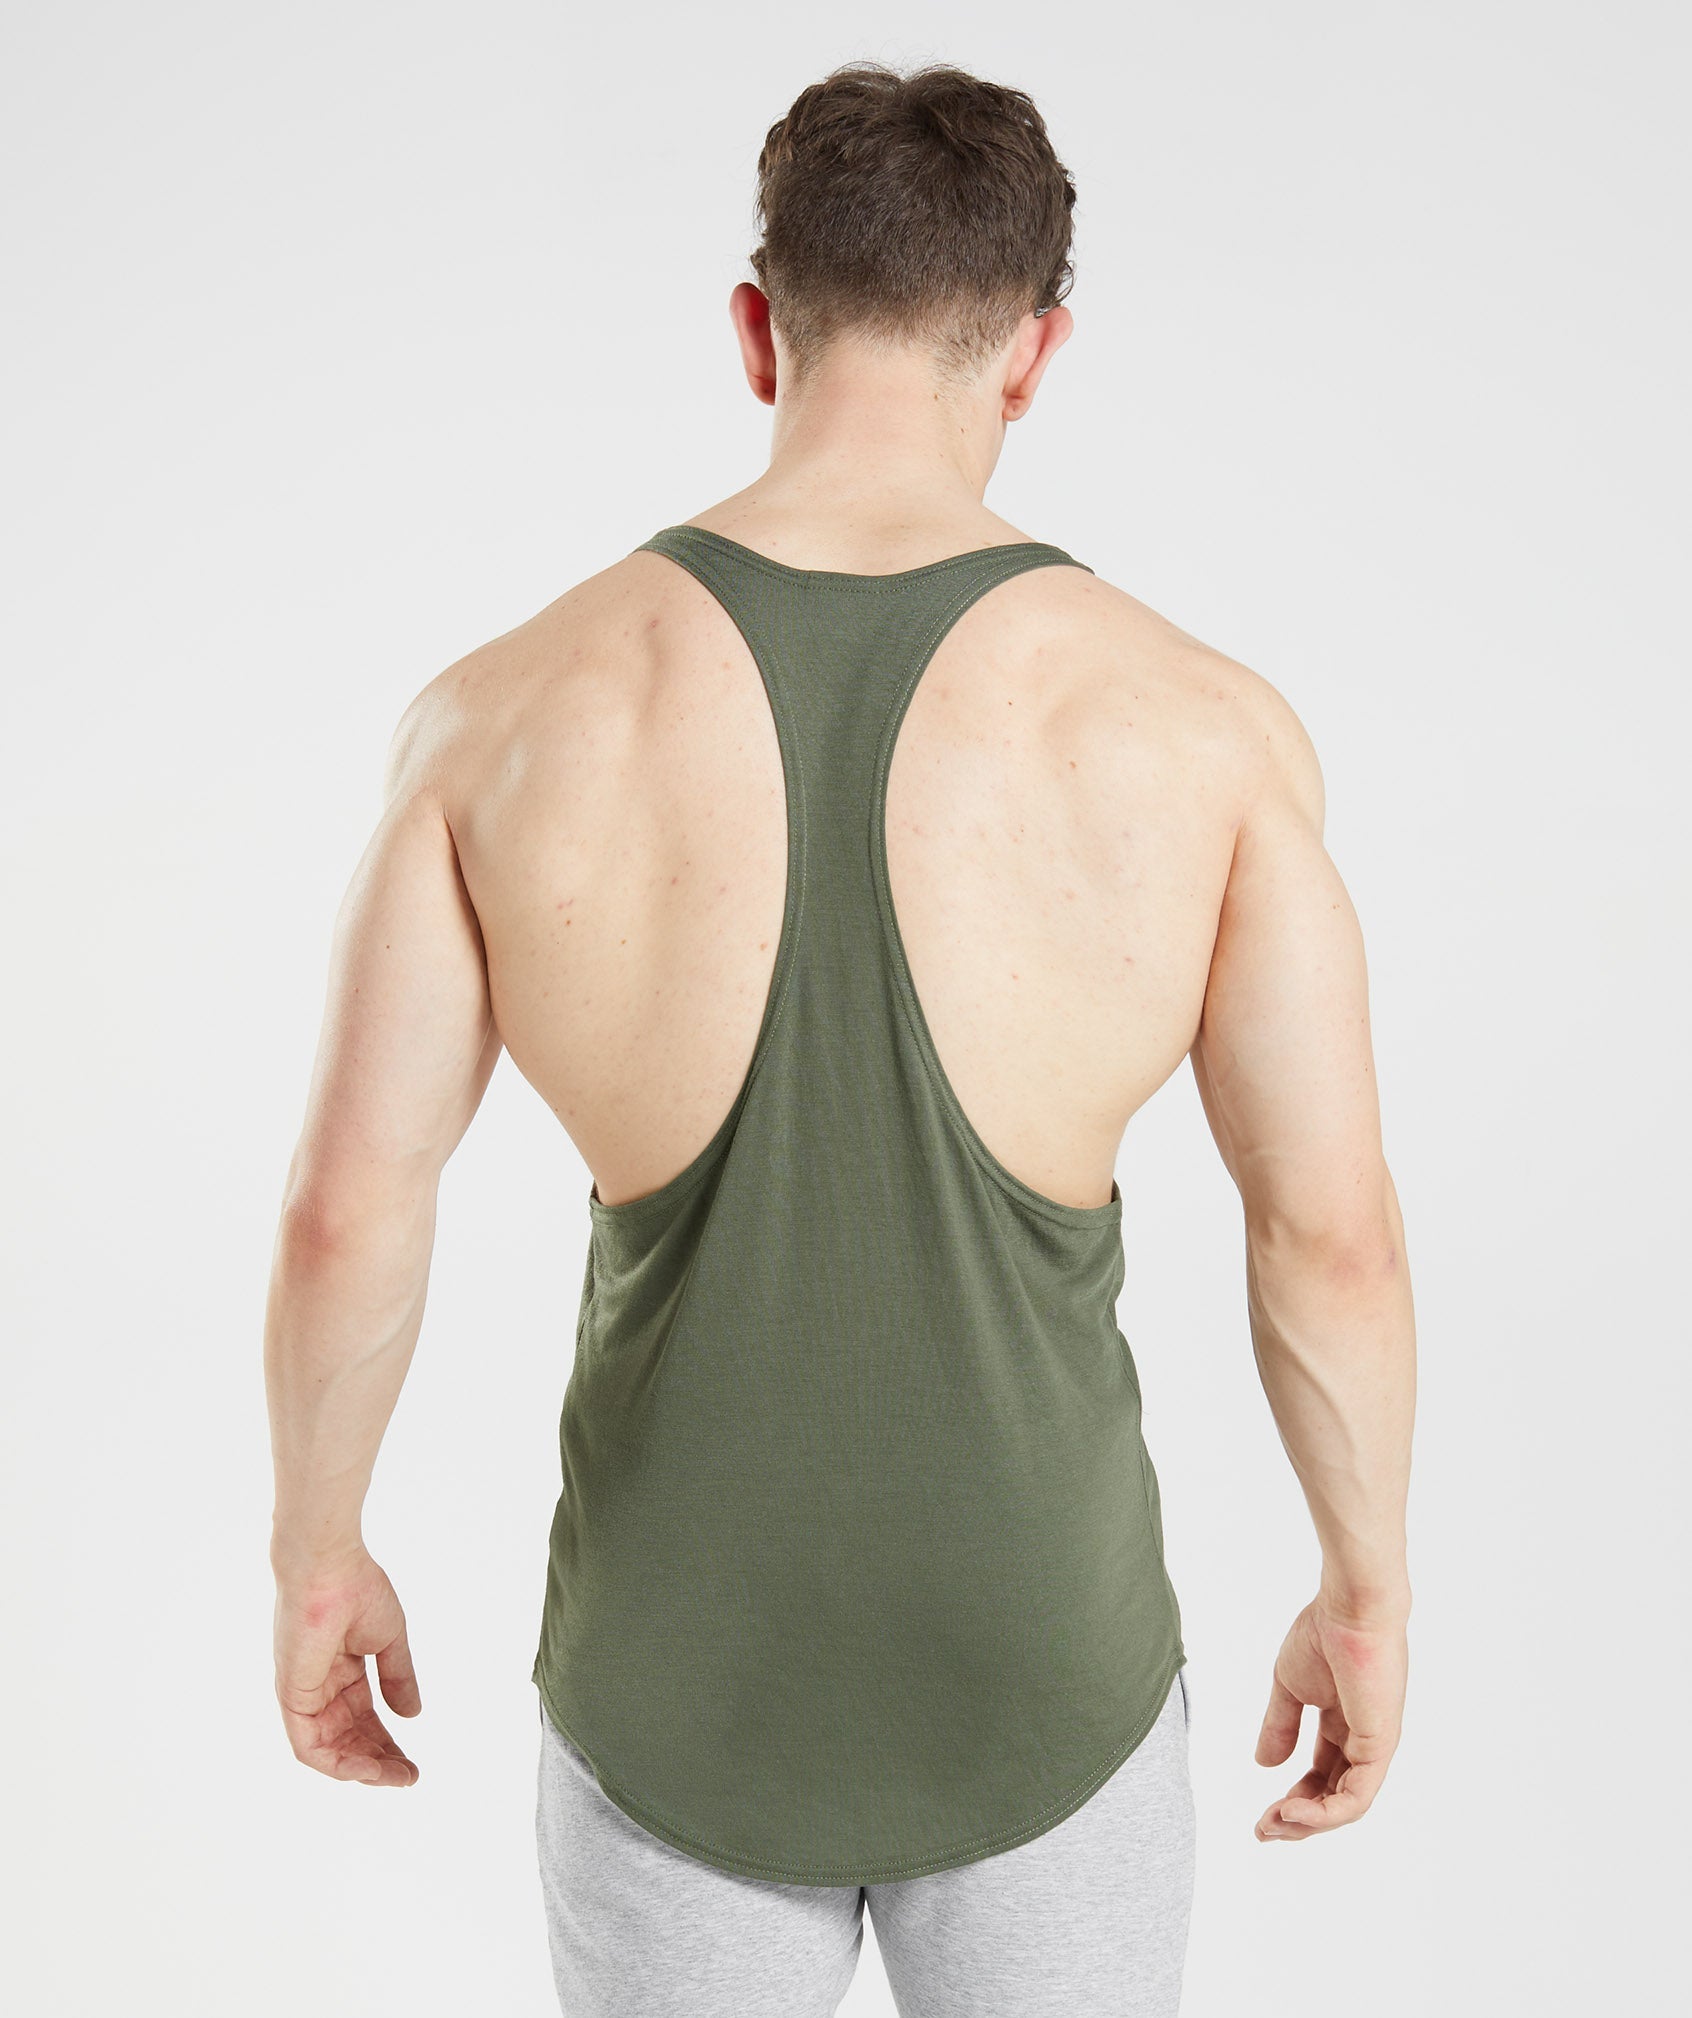 GS x David Laid Stringer in Core Olive - view 3